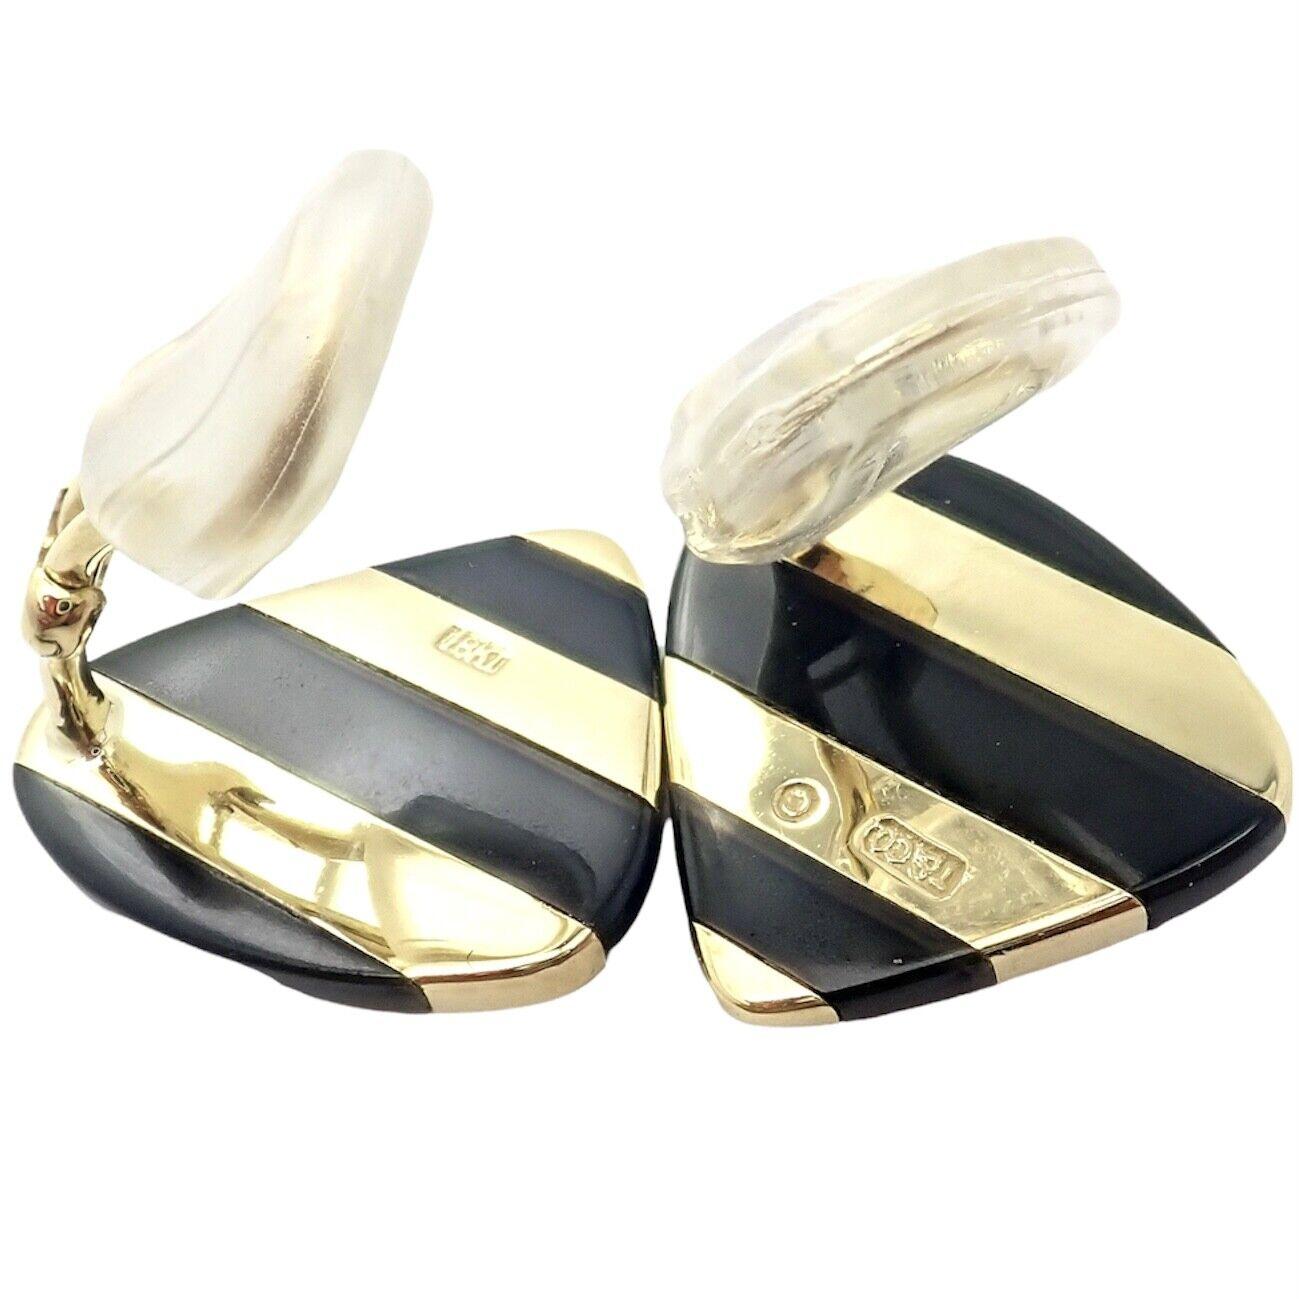 18k Yellow Gold Inlaid Black Jade Earrings by Angela Cummings for Tiffany & Co.
With Black Jade Inlay.
These earrings are for not pierced ears, but they can be converted by adding posts.
Details:
Weight: 14.8 grams
Measurements: 22mm x 19mm
Stamped